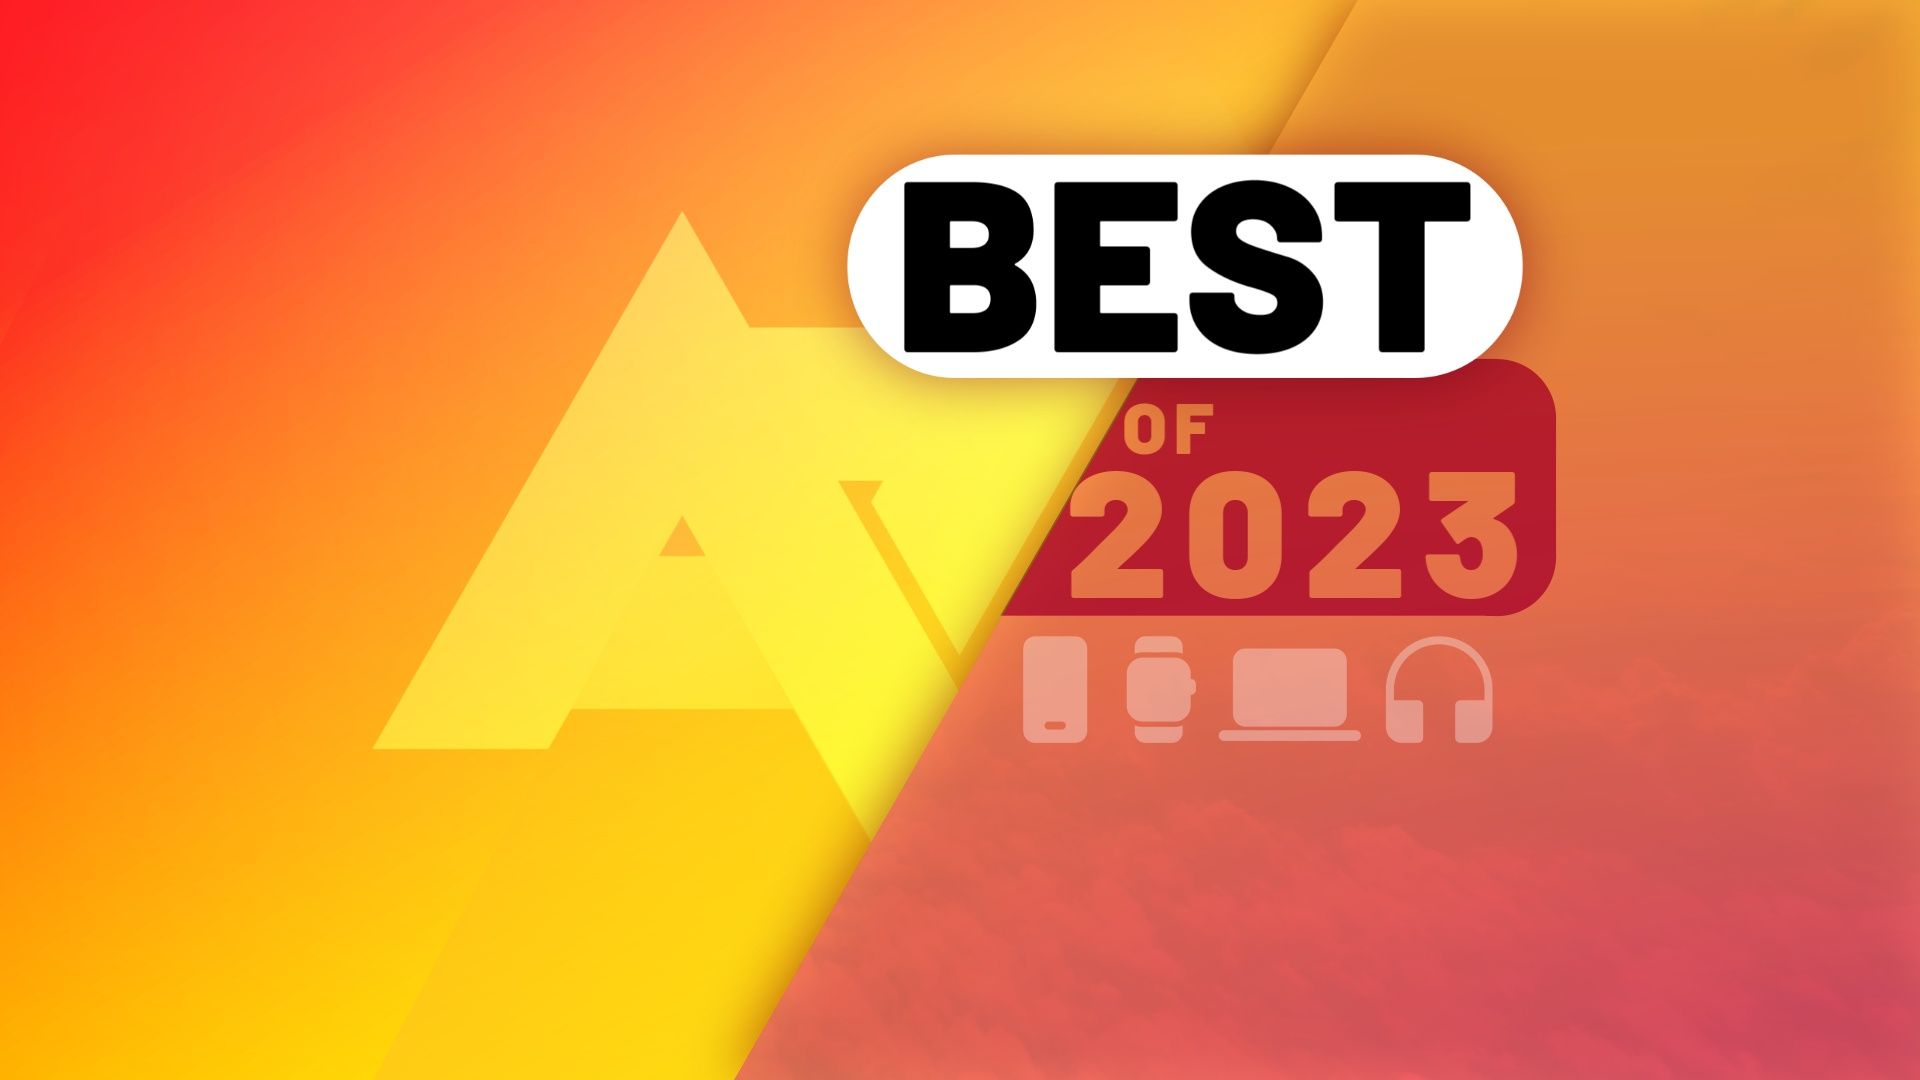 The Android Police logo and text for the best of 2023 awards